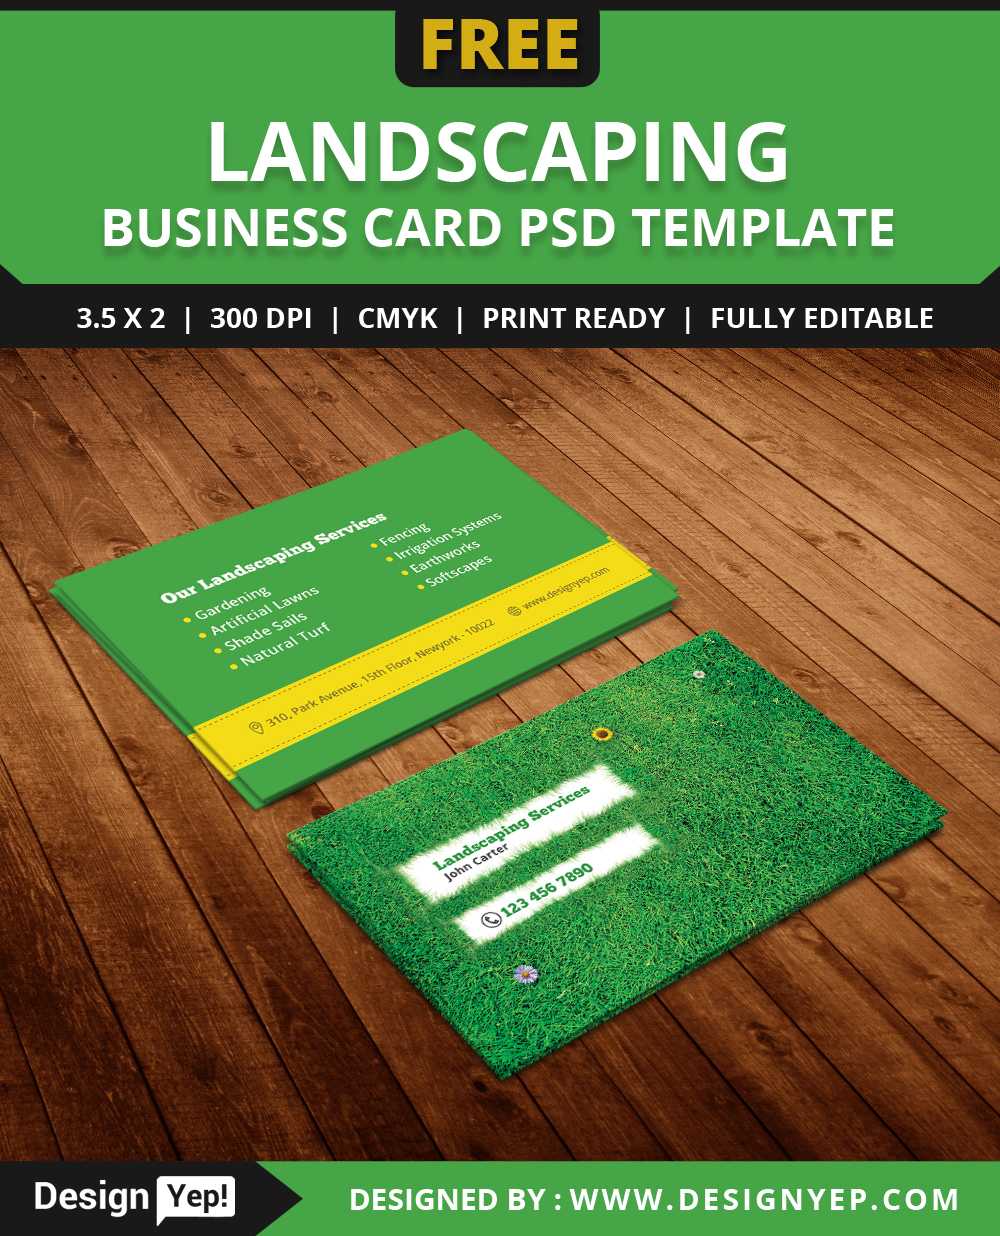 Free Landscaping Business Card Template Psd - Designyep For Landscaping Business Card Template